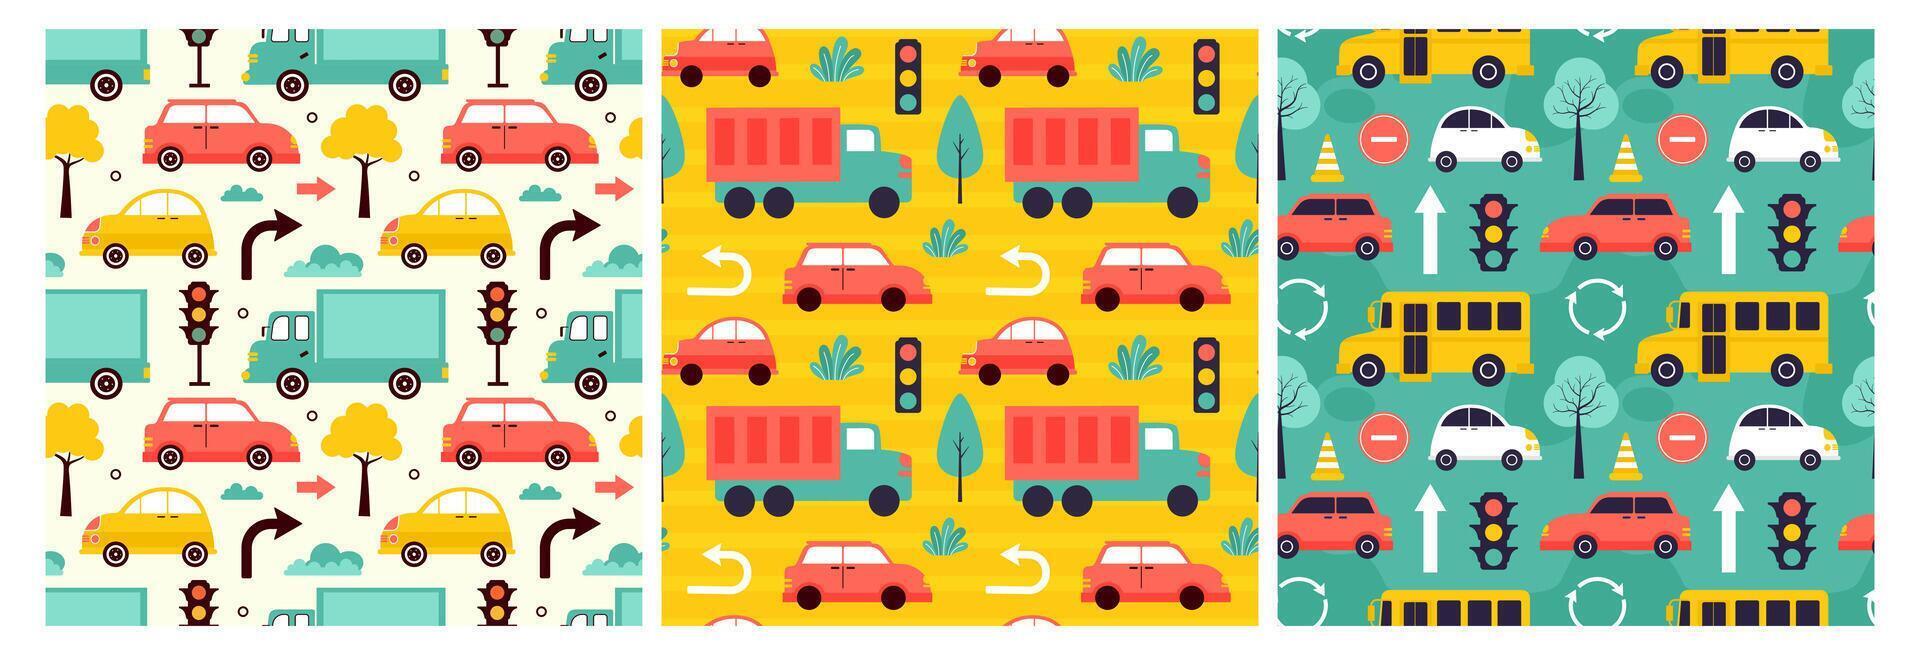 Toys Seamless Pattern Design with Boys and Girls Children Toy Equipment in Cartoon Flat Illustration vector